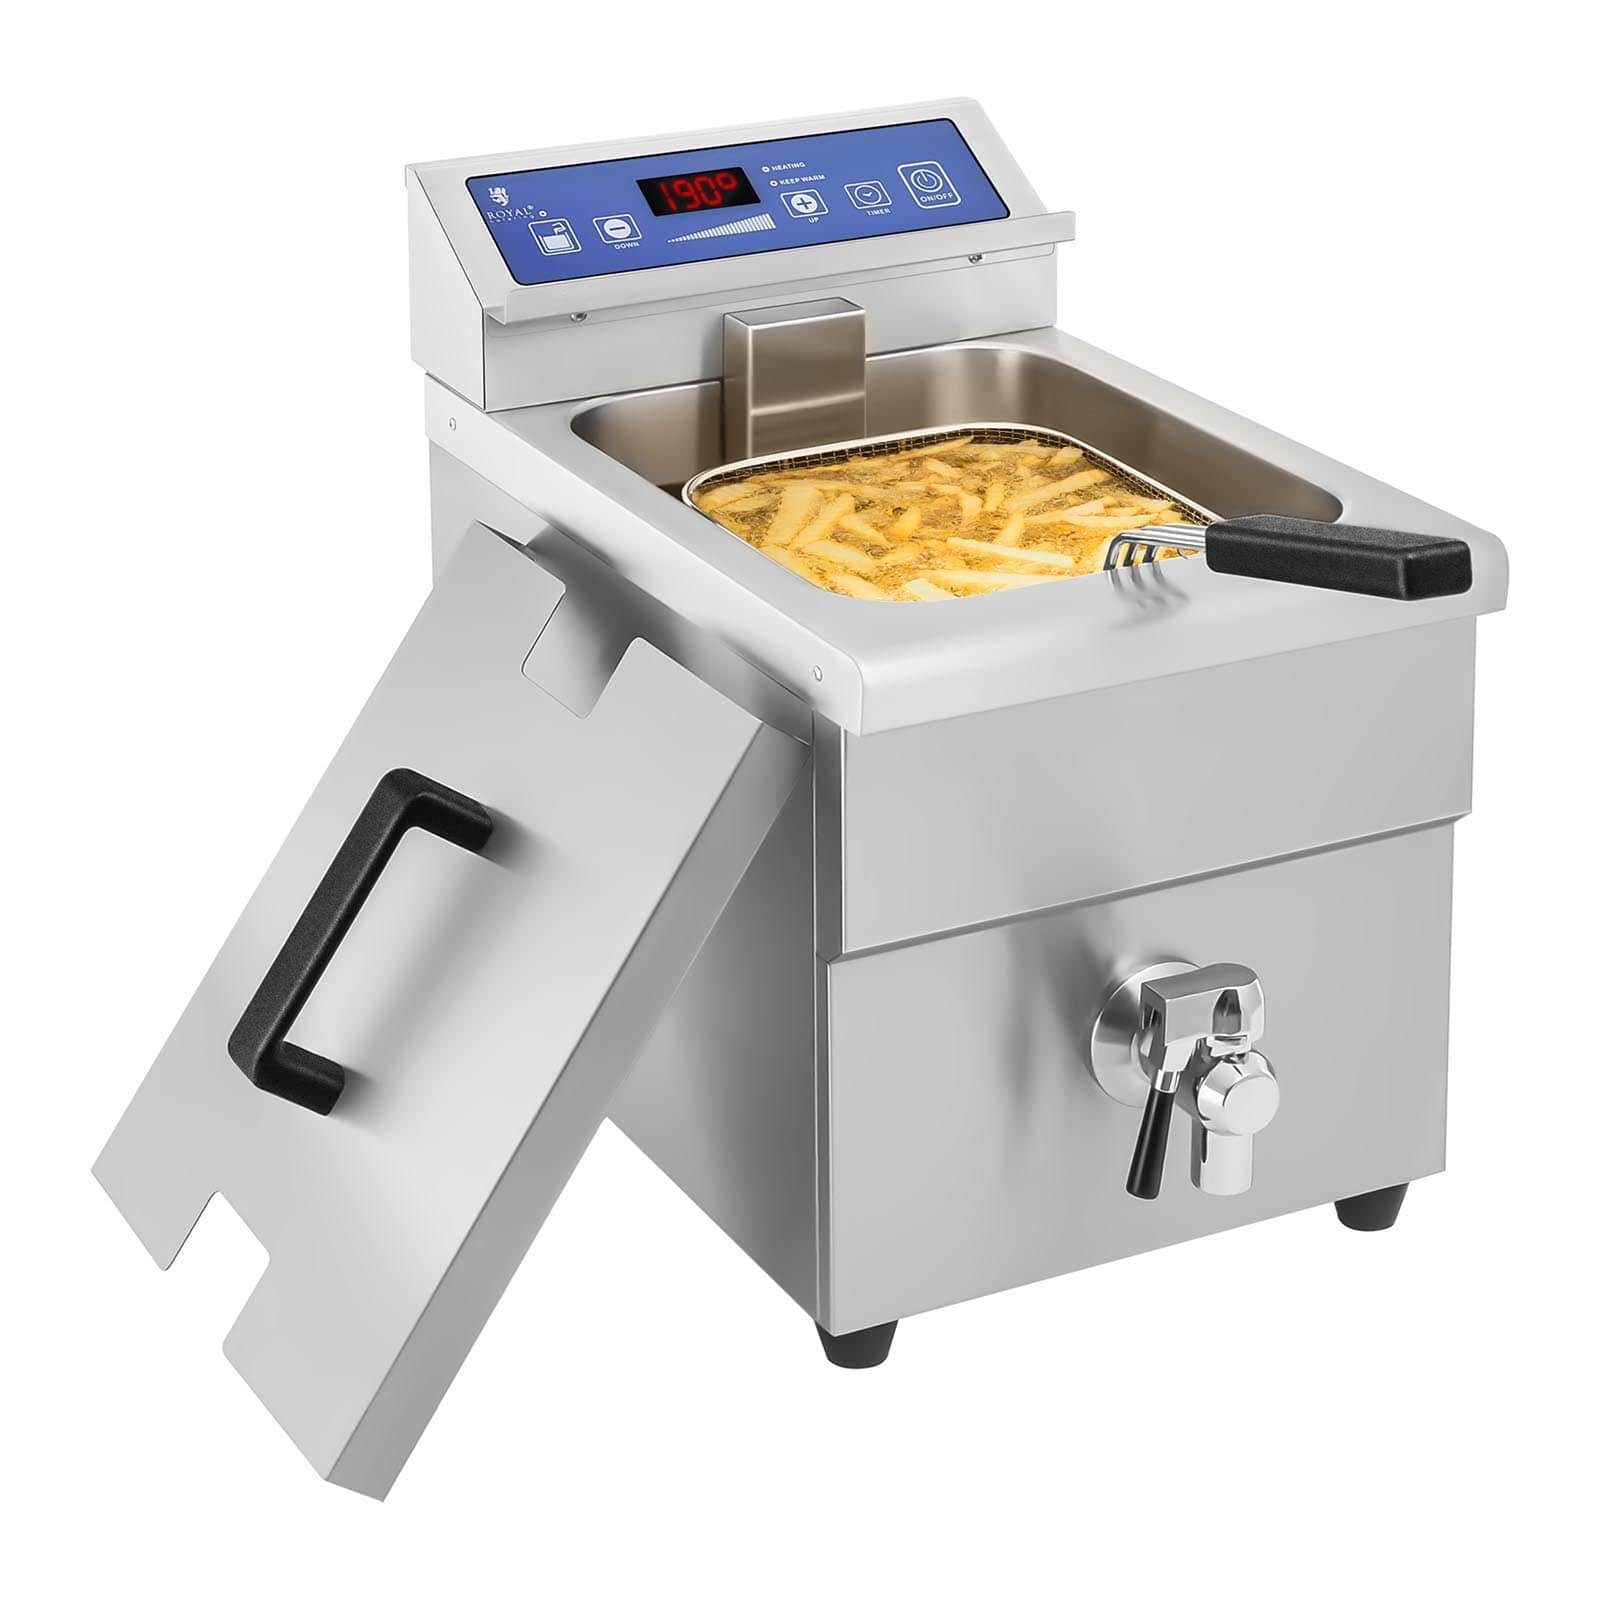 Royal Catering Fritteuse 10 Fritteuse W Friteuse 3500 Fritöse Elektro, L Induktionsfritteuse